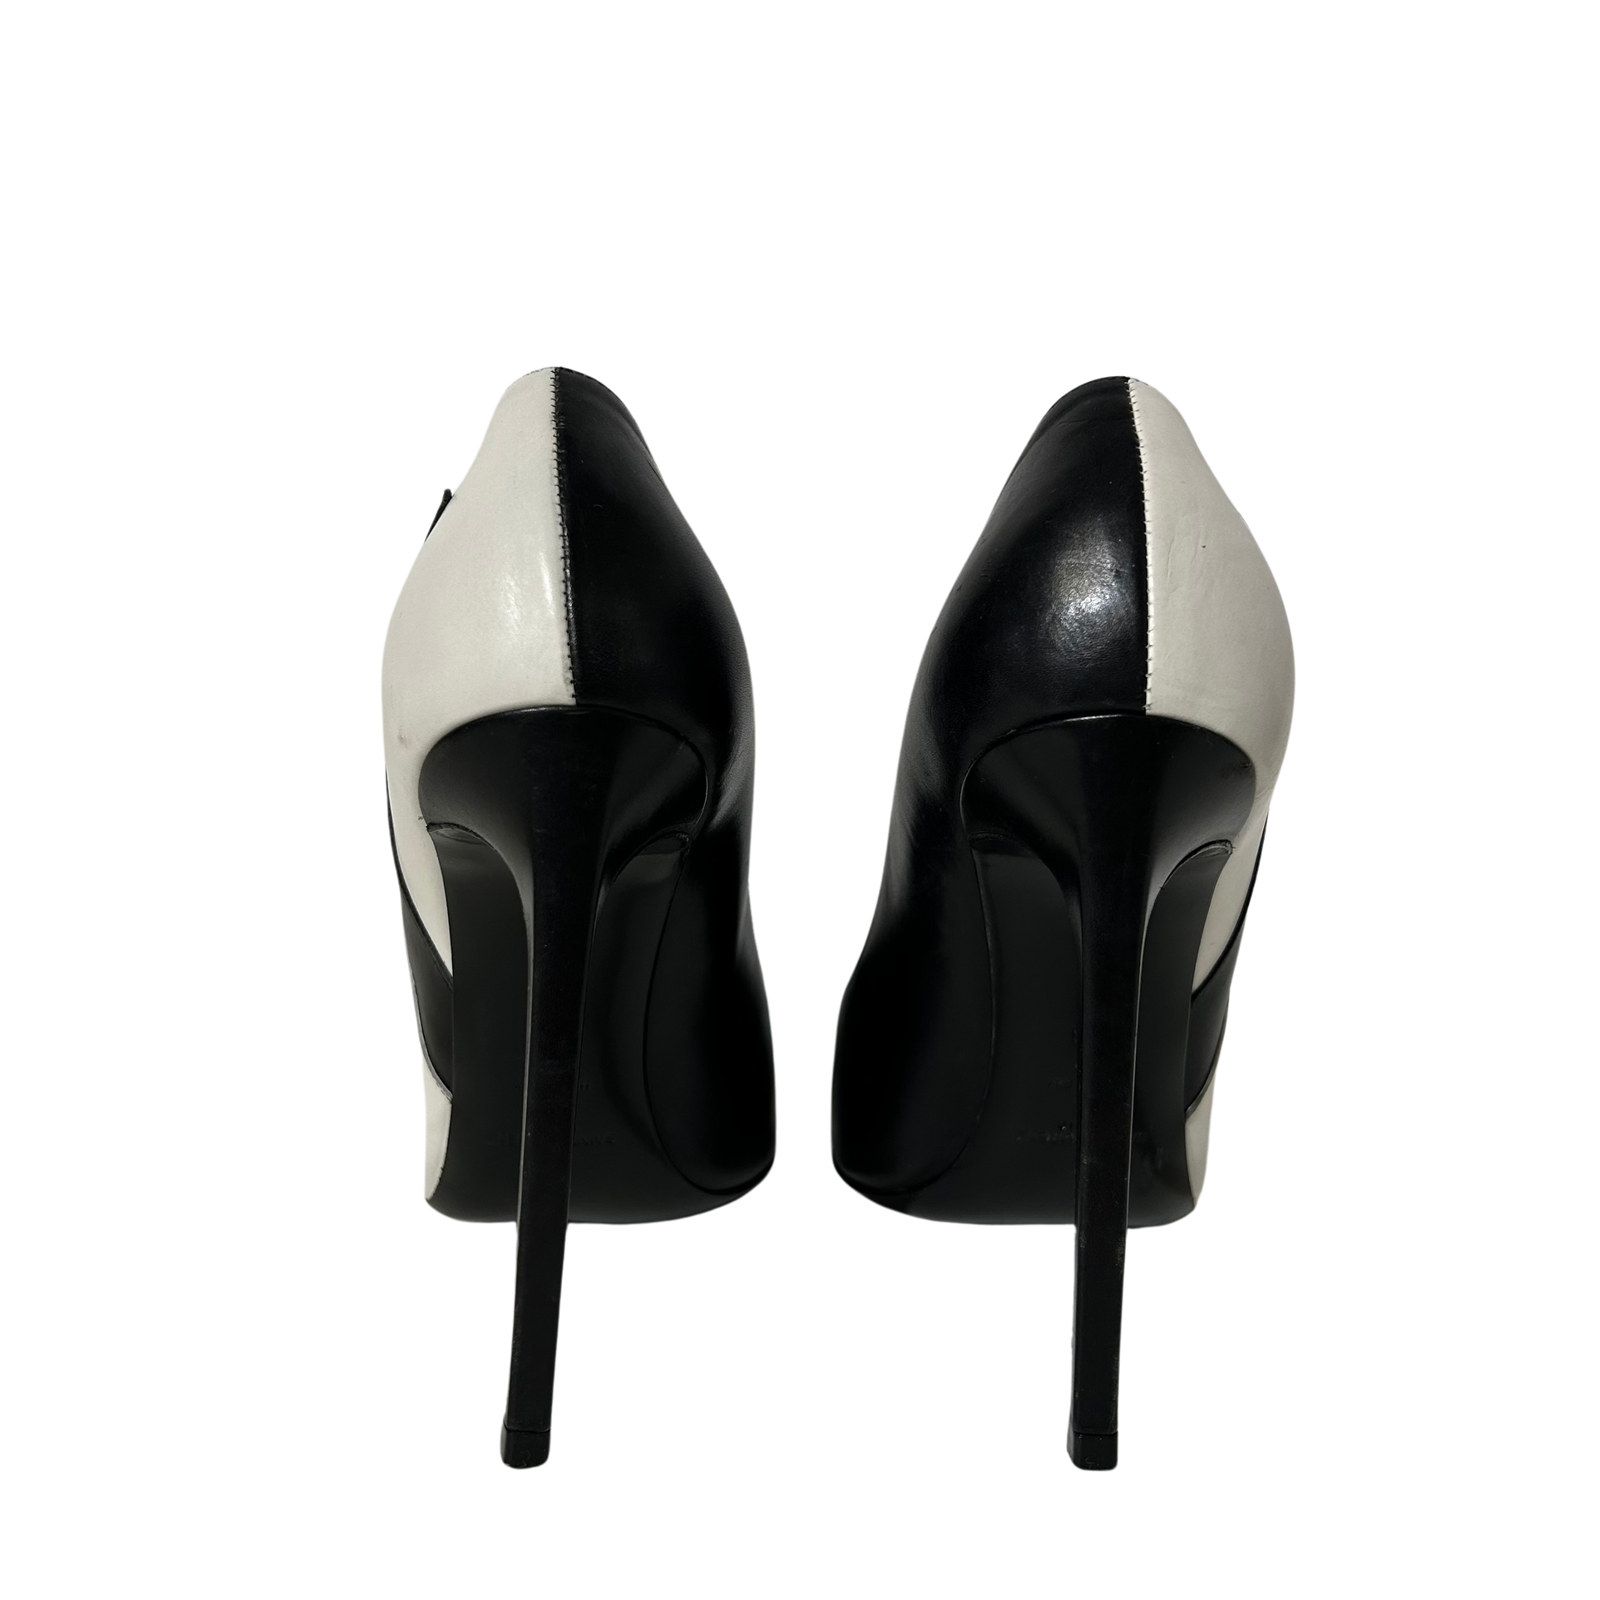 Black/White Leather Pointed Toe High Heels 38